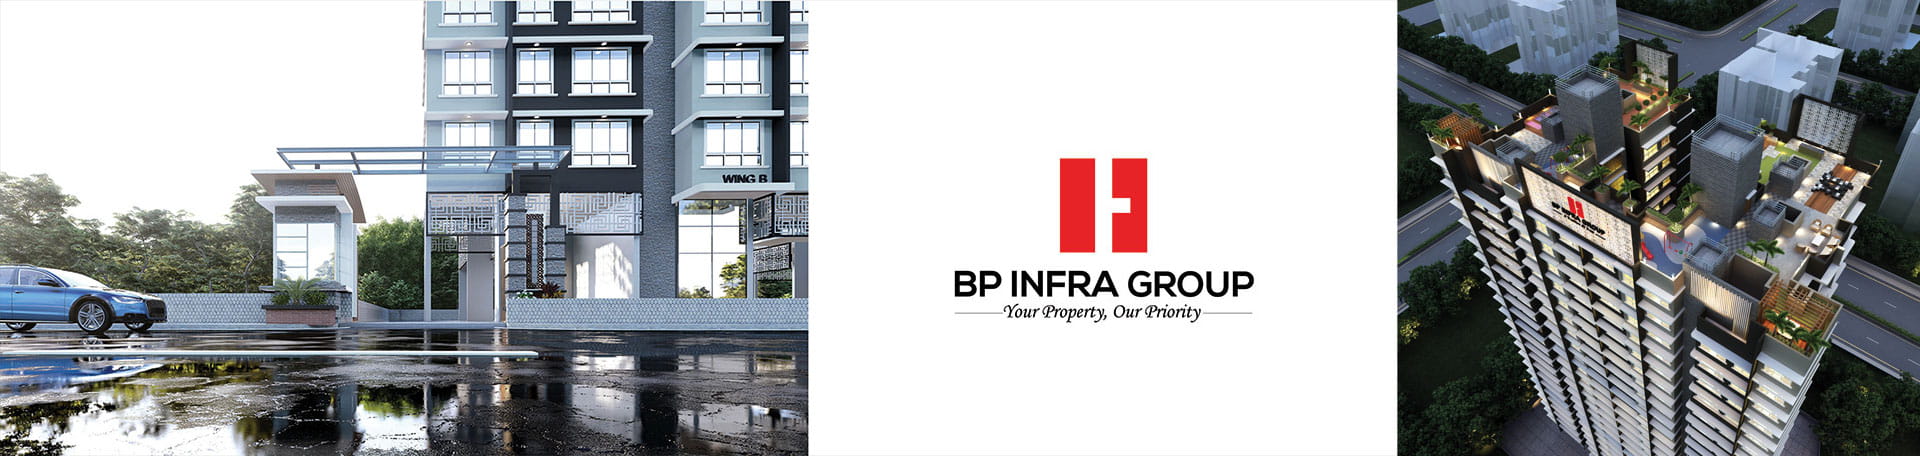 Case Study of BP Infra by a Real Estate Creative Agency